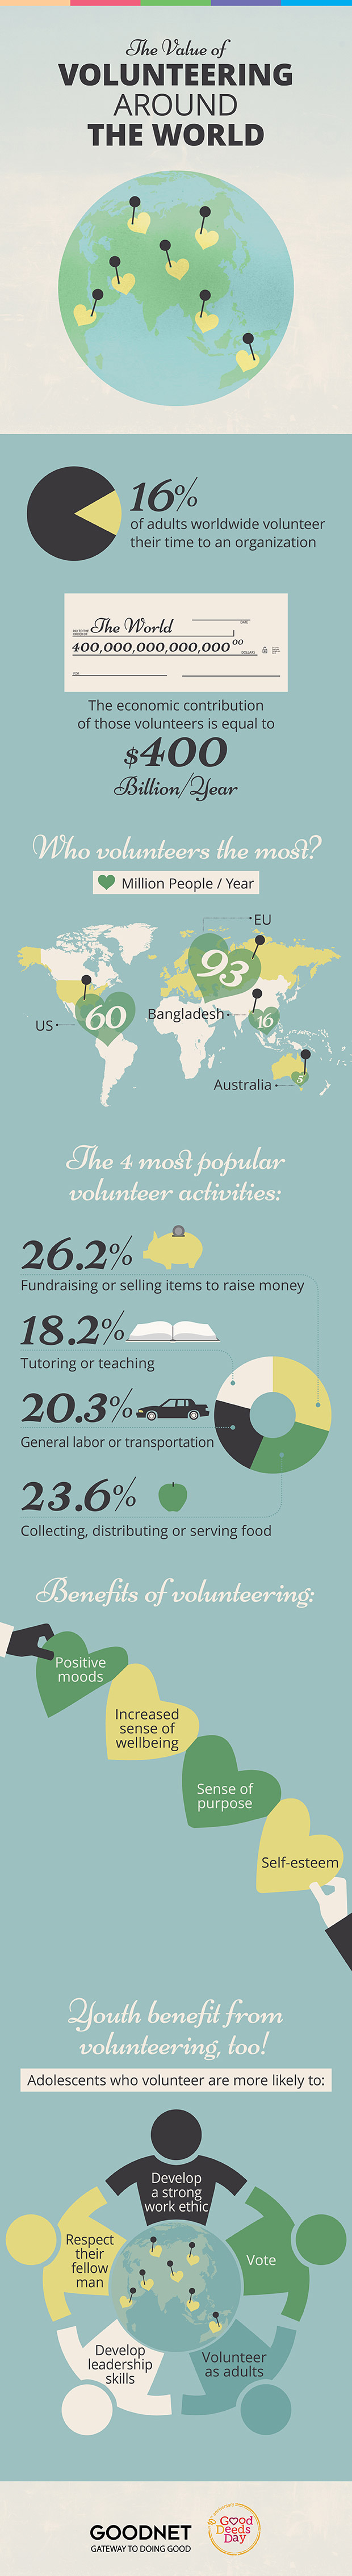 16% of adults worldwide volunteer their time to an organization.    The economic contribution of those volunteers is equal to $400 billion/year    Who volunteers the most?   EU: 93 million/year  US: 60 million/year   Bangladesh: 16 million/year  Australia: 5 million/year    The 4 most popular volunteer service activities:  #1 Fundraising or selling items to raise money (26.2%)  #2 Collecting, preparing, distributing or serving food (23.6%)  #3 Engaging in general labor or transportation (20.3%)  #4 Tutoring or teaching (18.2%)    Benefits of volunteering:   Increased sense of wellbeing   Self-esteem   Sense of purpose   More positive moods    What about kids?   Youth volunteering is associated with positive outcomes during the teen years as well as in adulthood. Adolescents who volunteer are more likely to:   enjoy positive academic, psychological, and occupational well-being   have a strong work ethic as an adult  volunteer as an adult  vote  have respect for others  develop leadership skills  